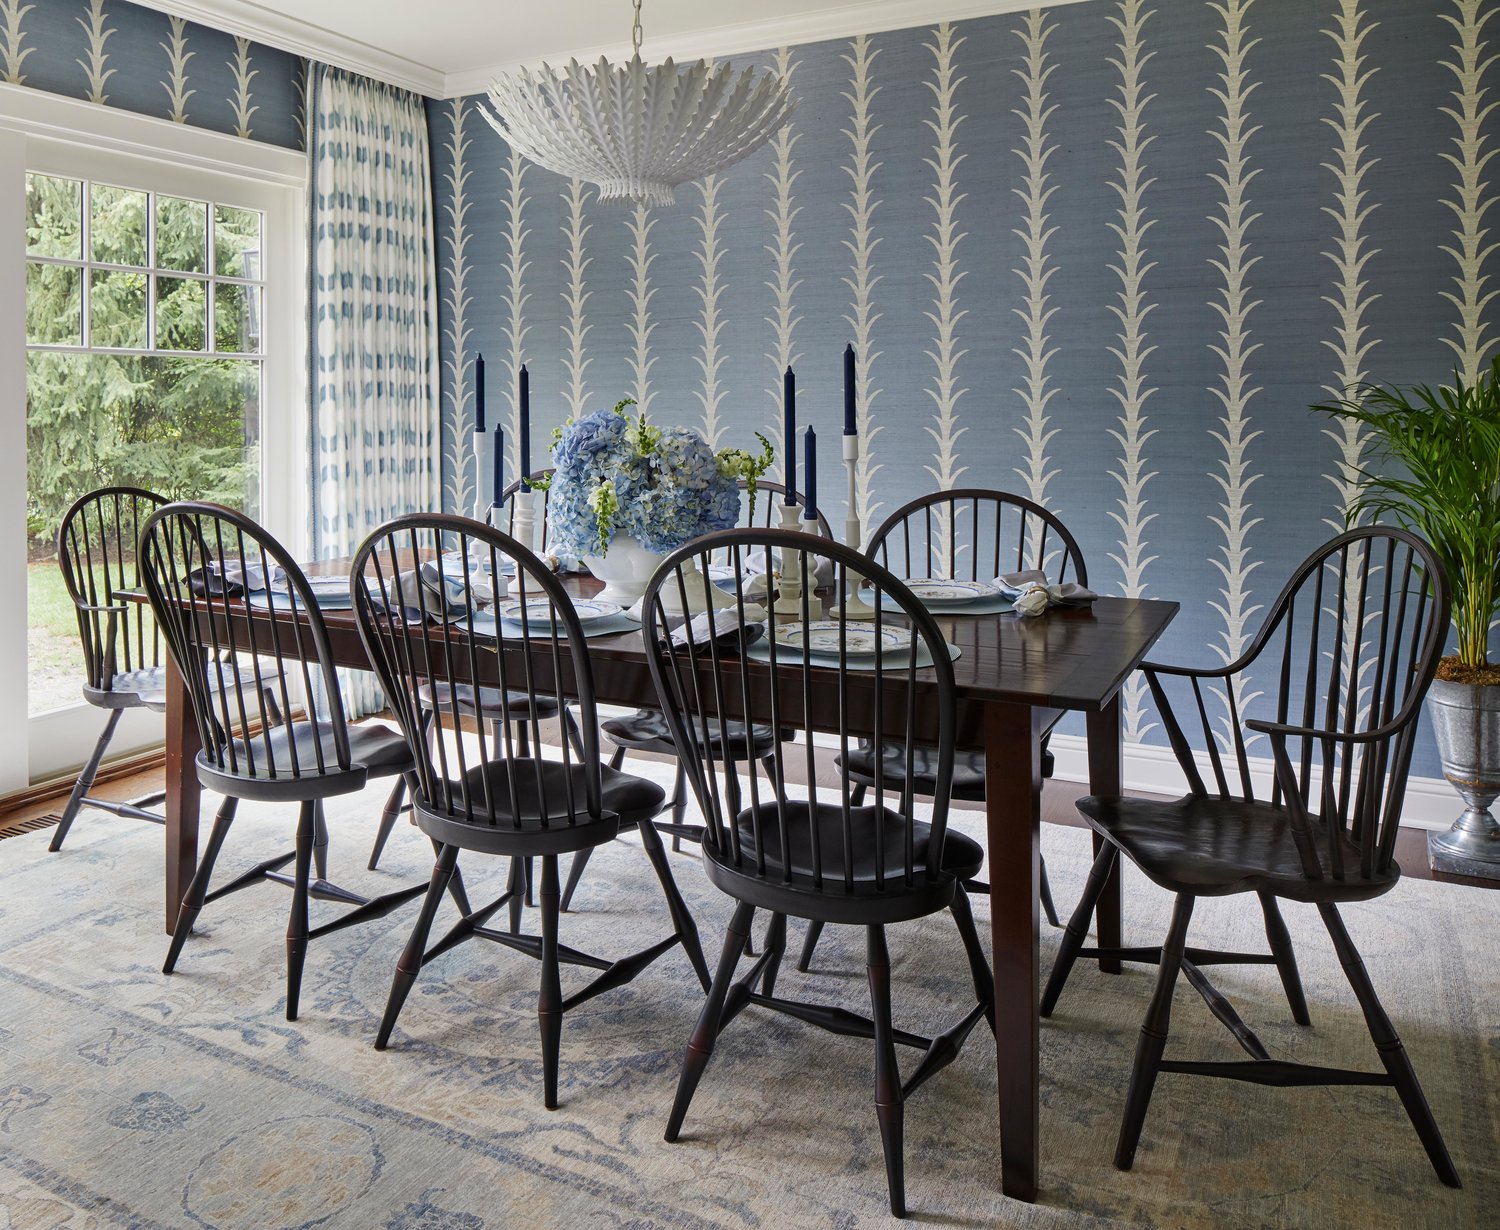 Acanthus motif and blue wallpaper in a classic dining room. Come see more interior design inspiration from Elizabeth Drake. Photo by Werner Straube. #interiordesign #classicdesign #traditionaldecor #housetour #elizabethdrake